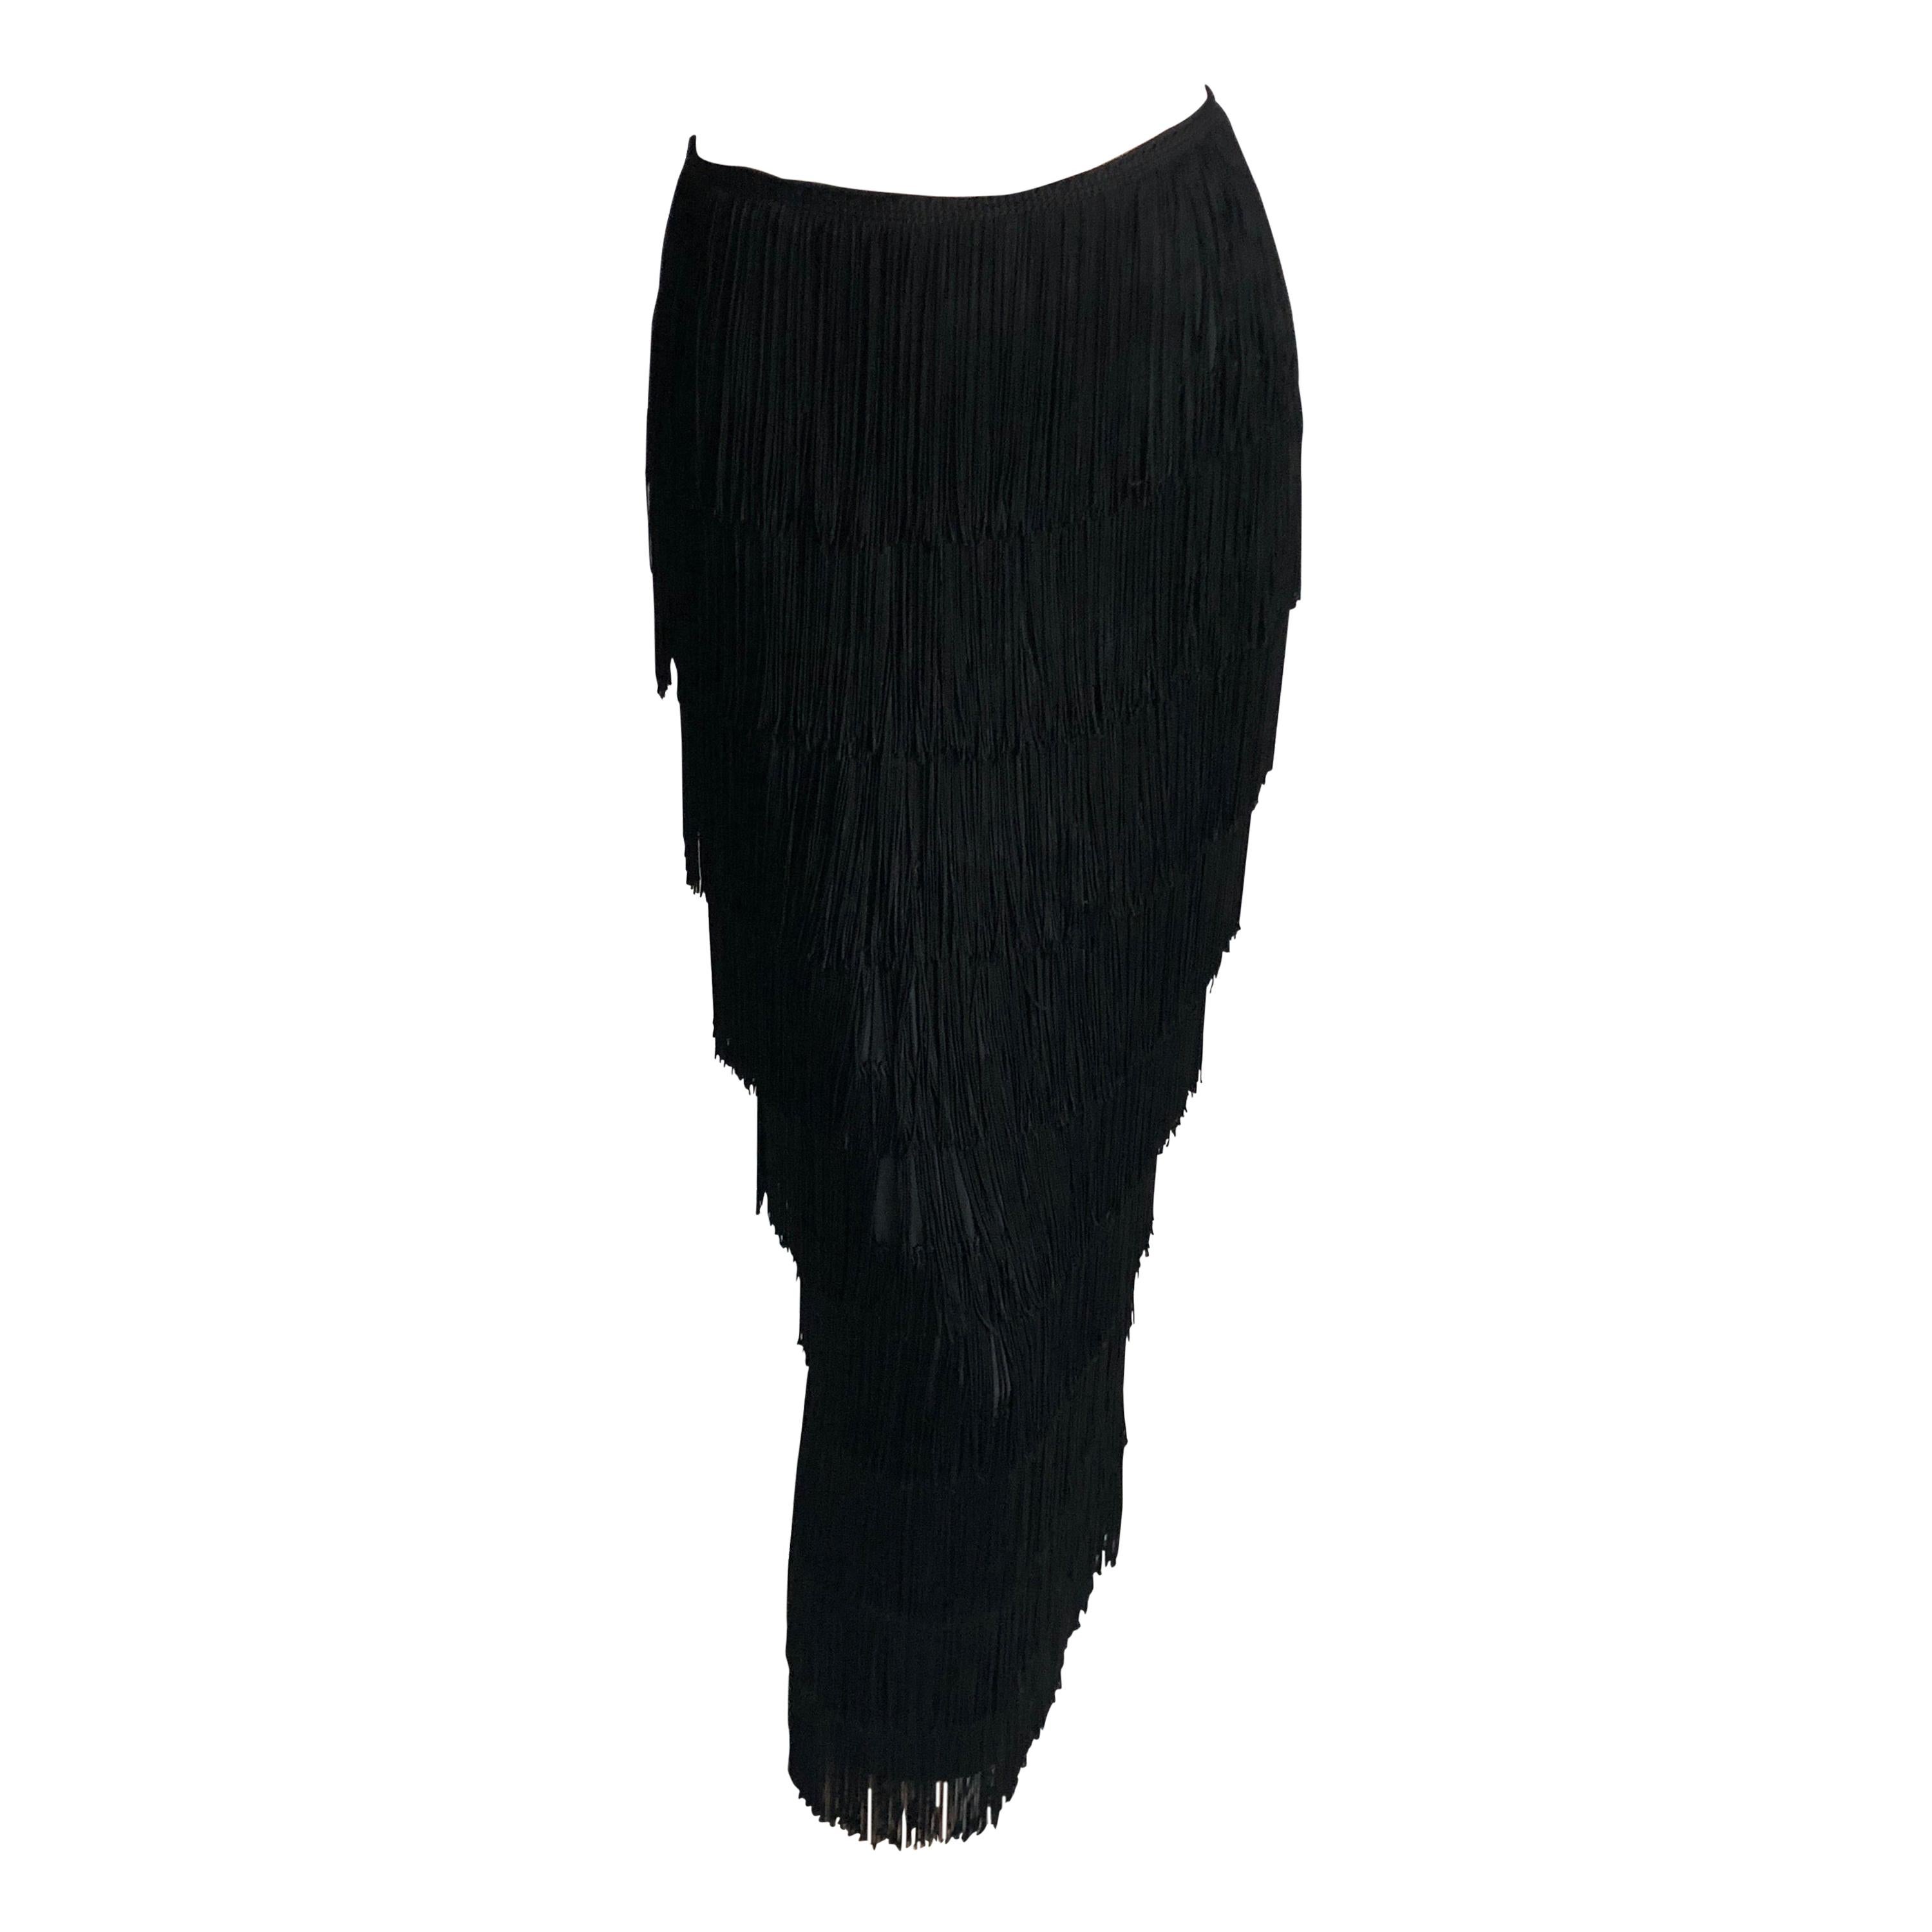 Authentic, preowned, vintage Norma Kamali OMO Long Skirt with Tiered Black Fringe, likely made in the late 80s.  The tiers of fringe create fabulous movement on this piece (see images 2 & 3, where we've screen grabbed some video).  Fully-lined;